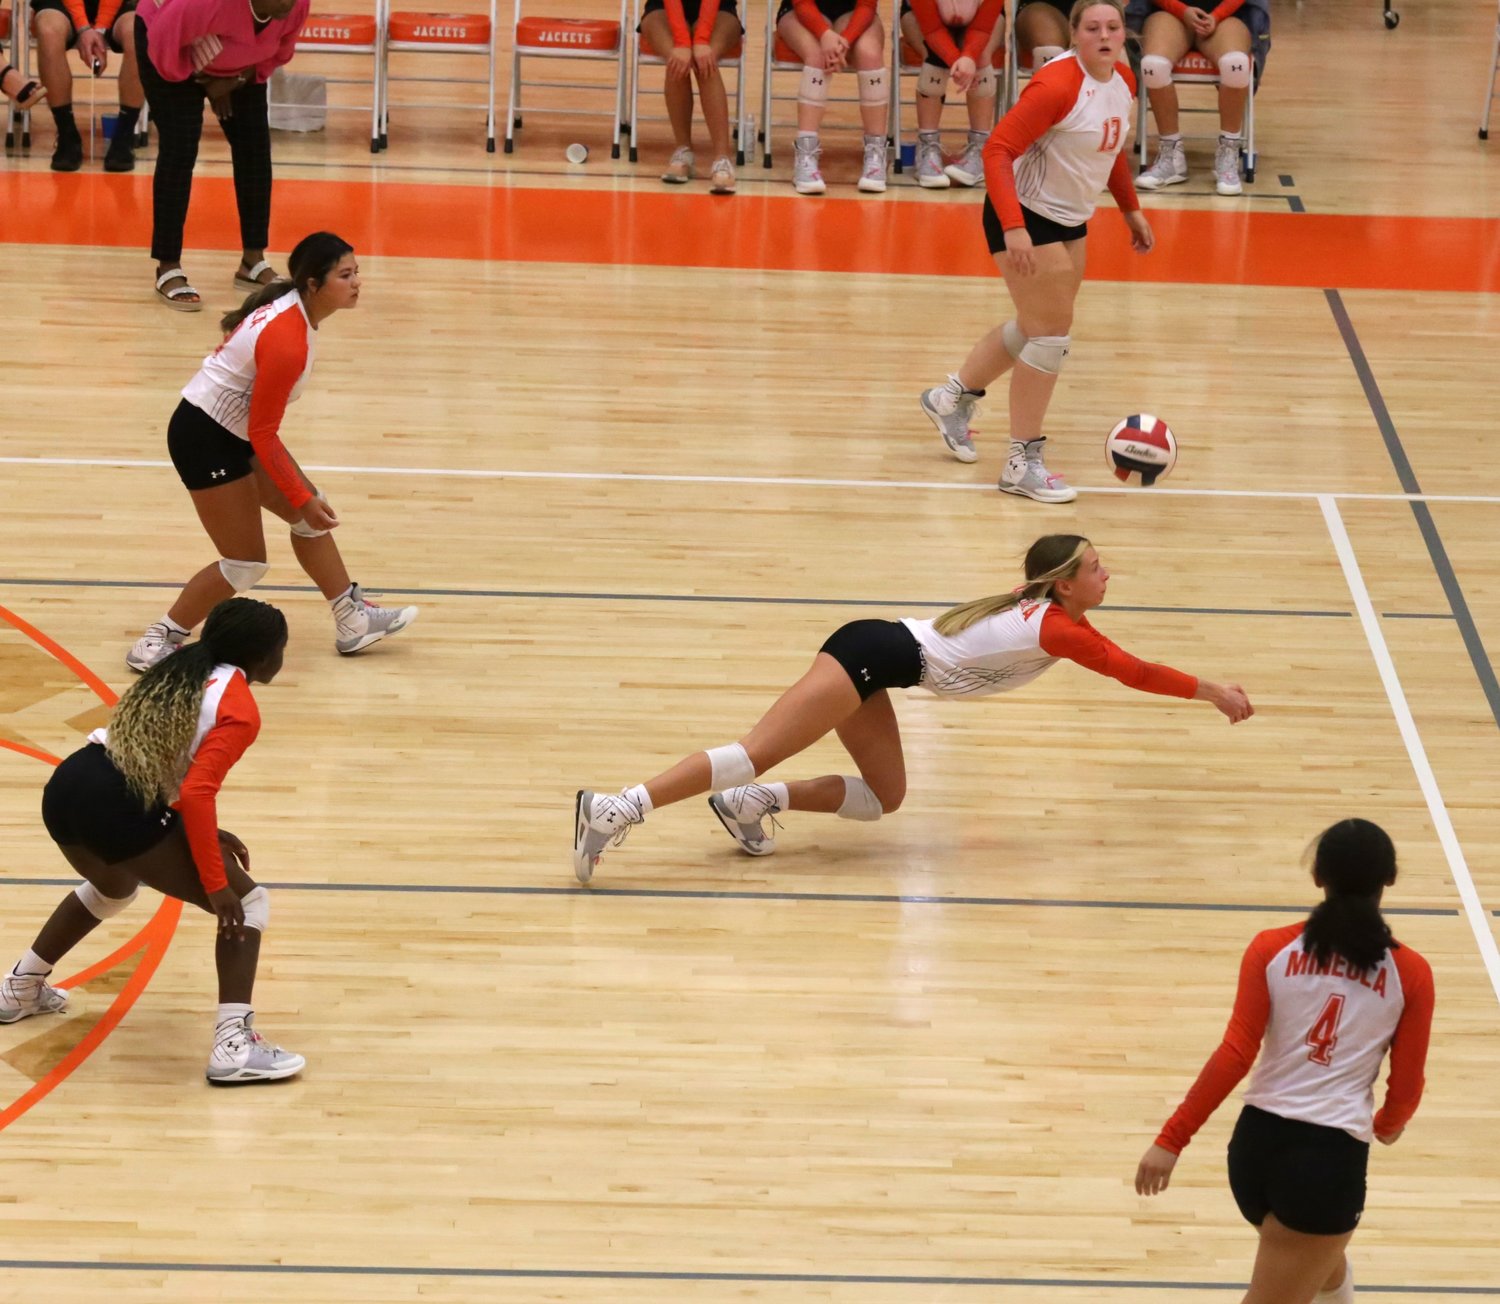 The Mineola defense secured the set one win against Harmony. Here Olivia Hughes digs a tough ball. The floor spacing of the Lady Jackets was spot-on.